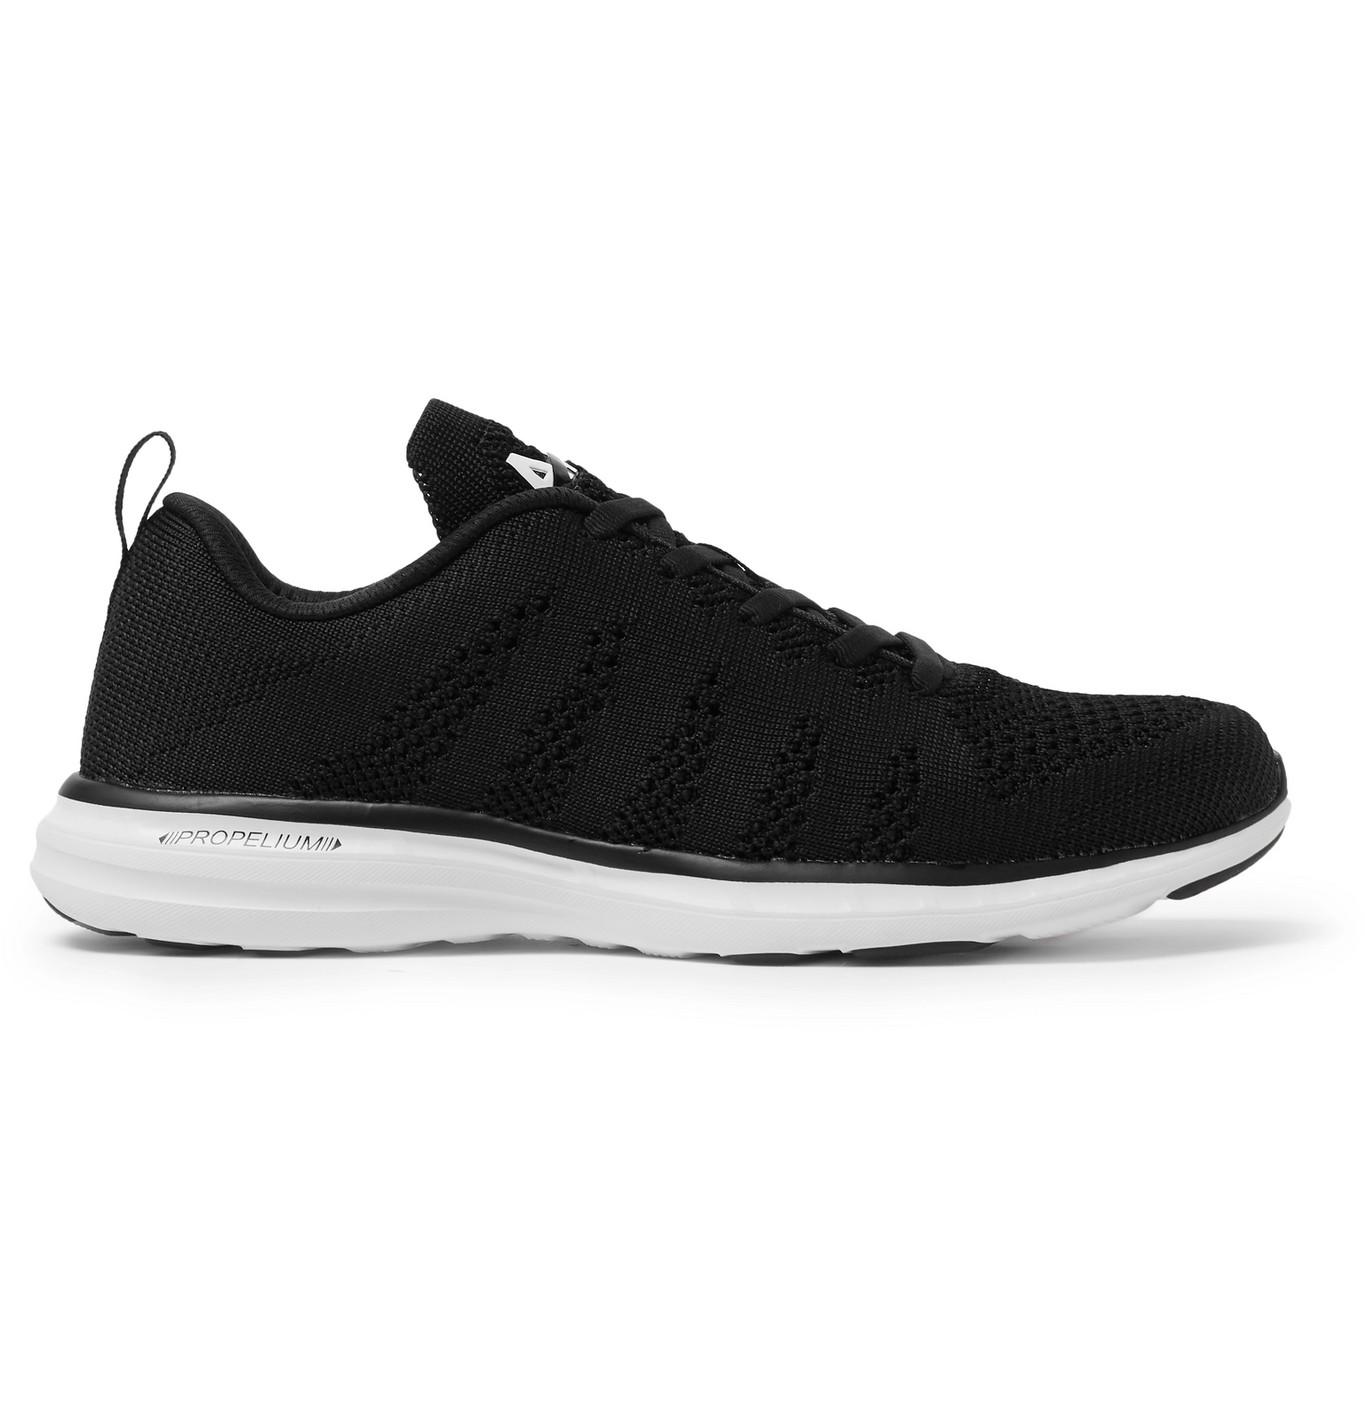 APL Shoes Pro Techloom Running Sneakers in Black for Men - Save 25% - Lyst